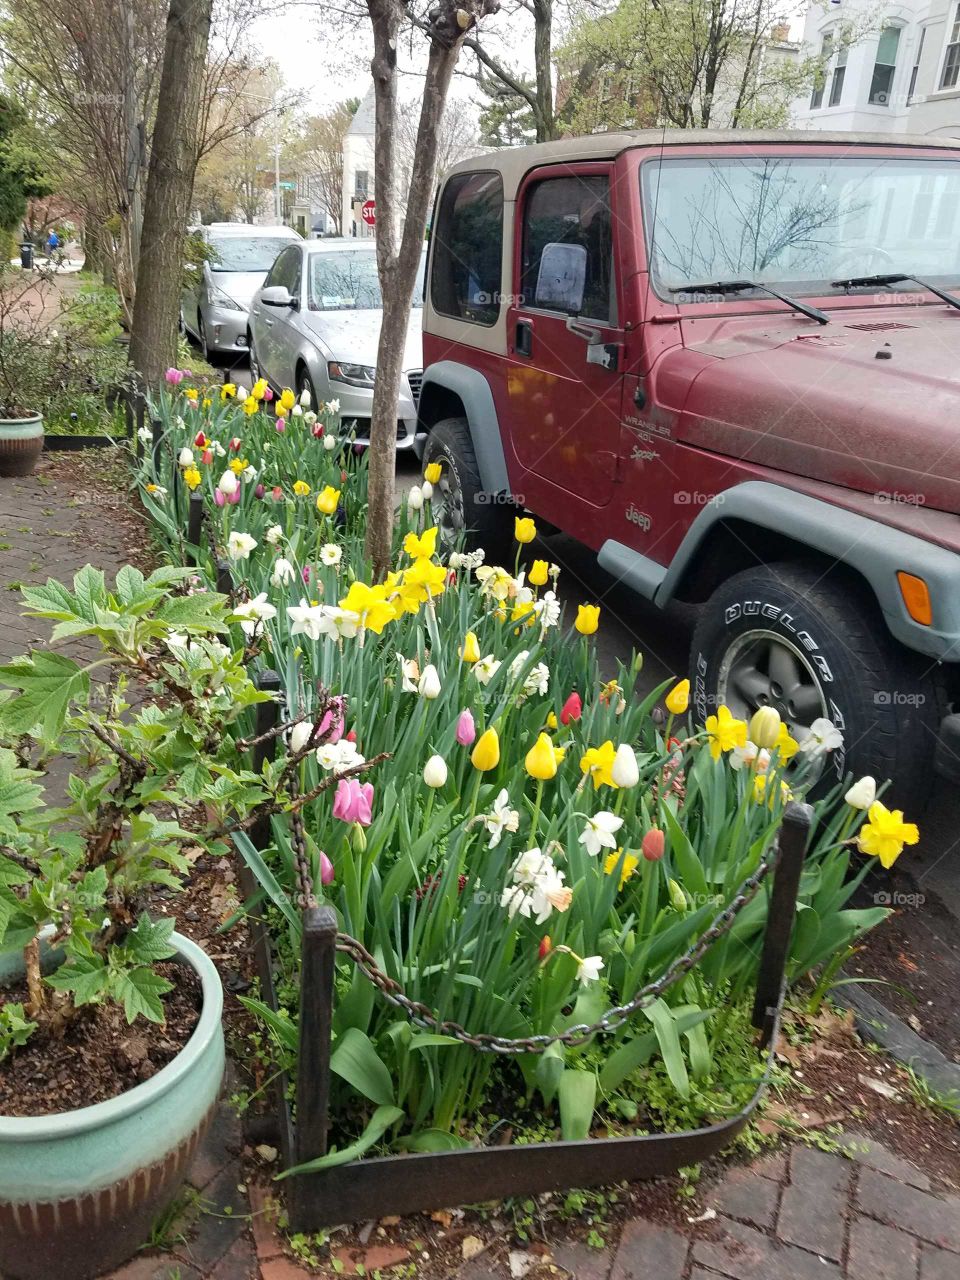 Tulips in bloom on a street in the Capitol Hill neighborhood of Washington, DC. Photo taken April 2018.